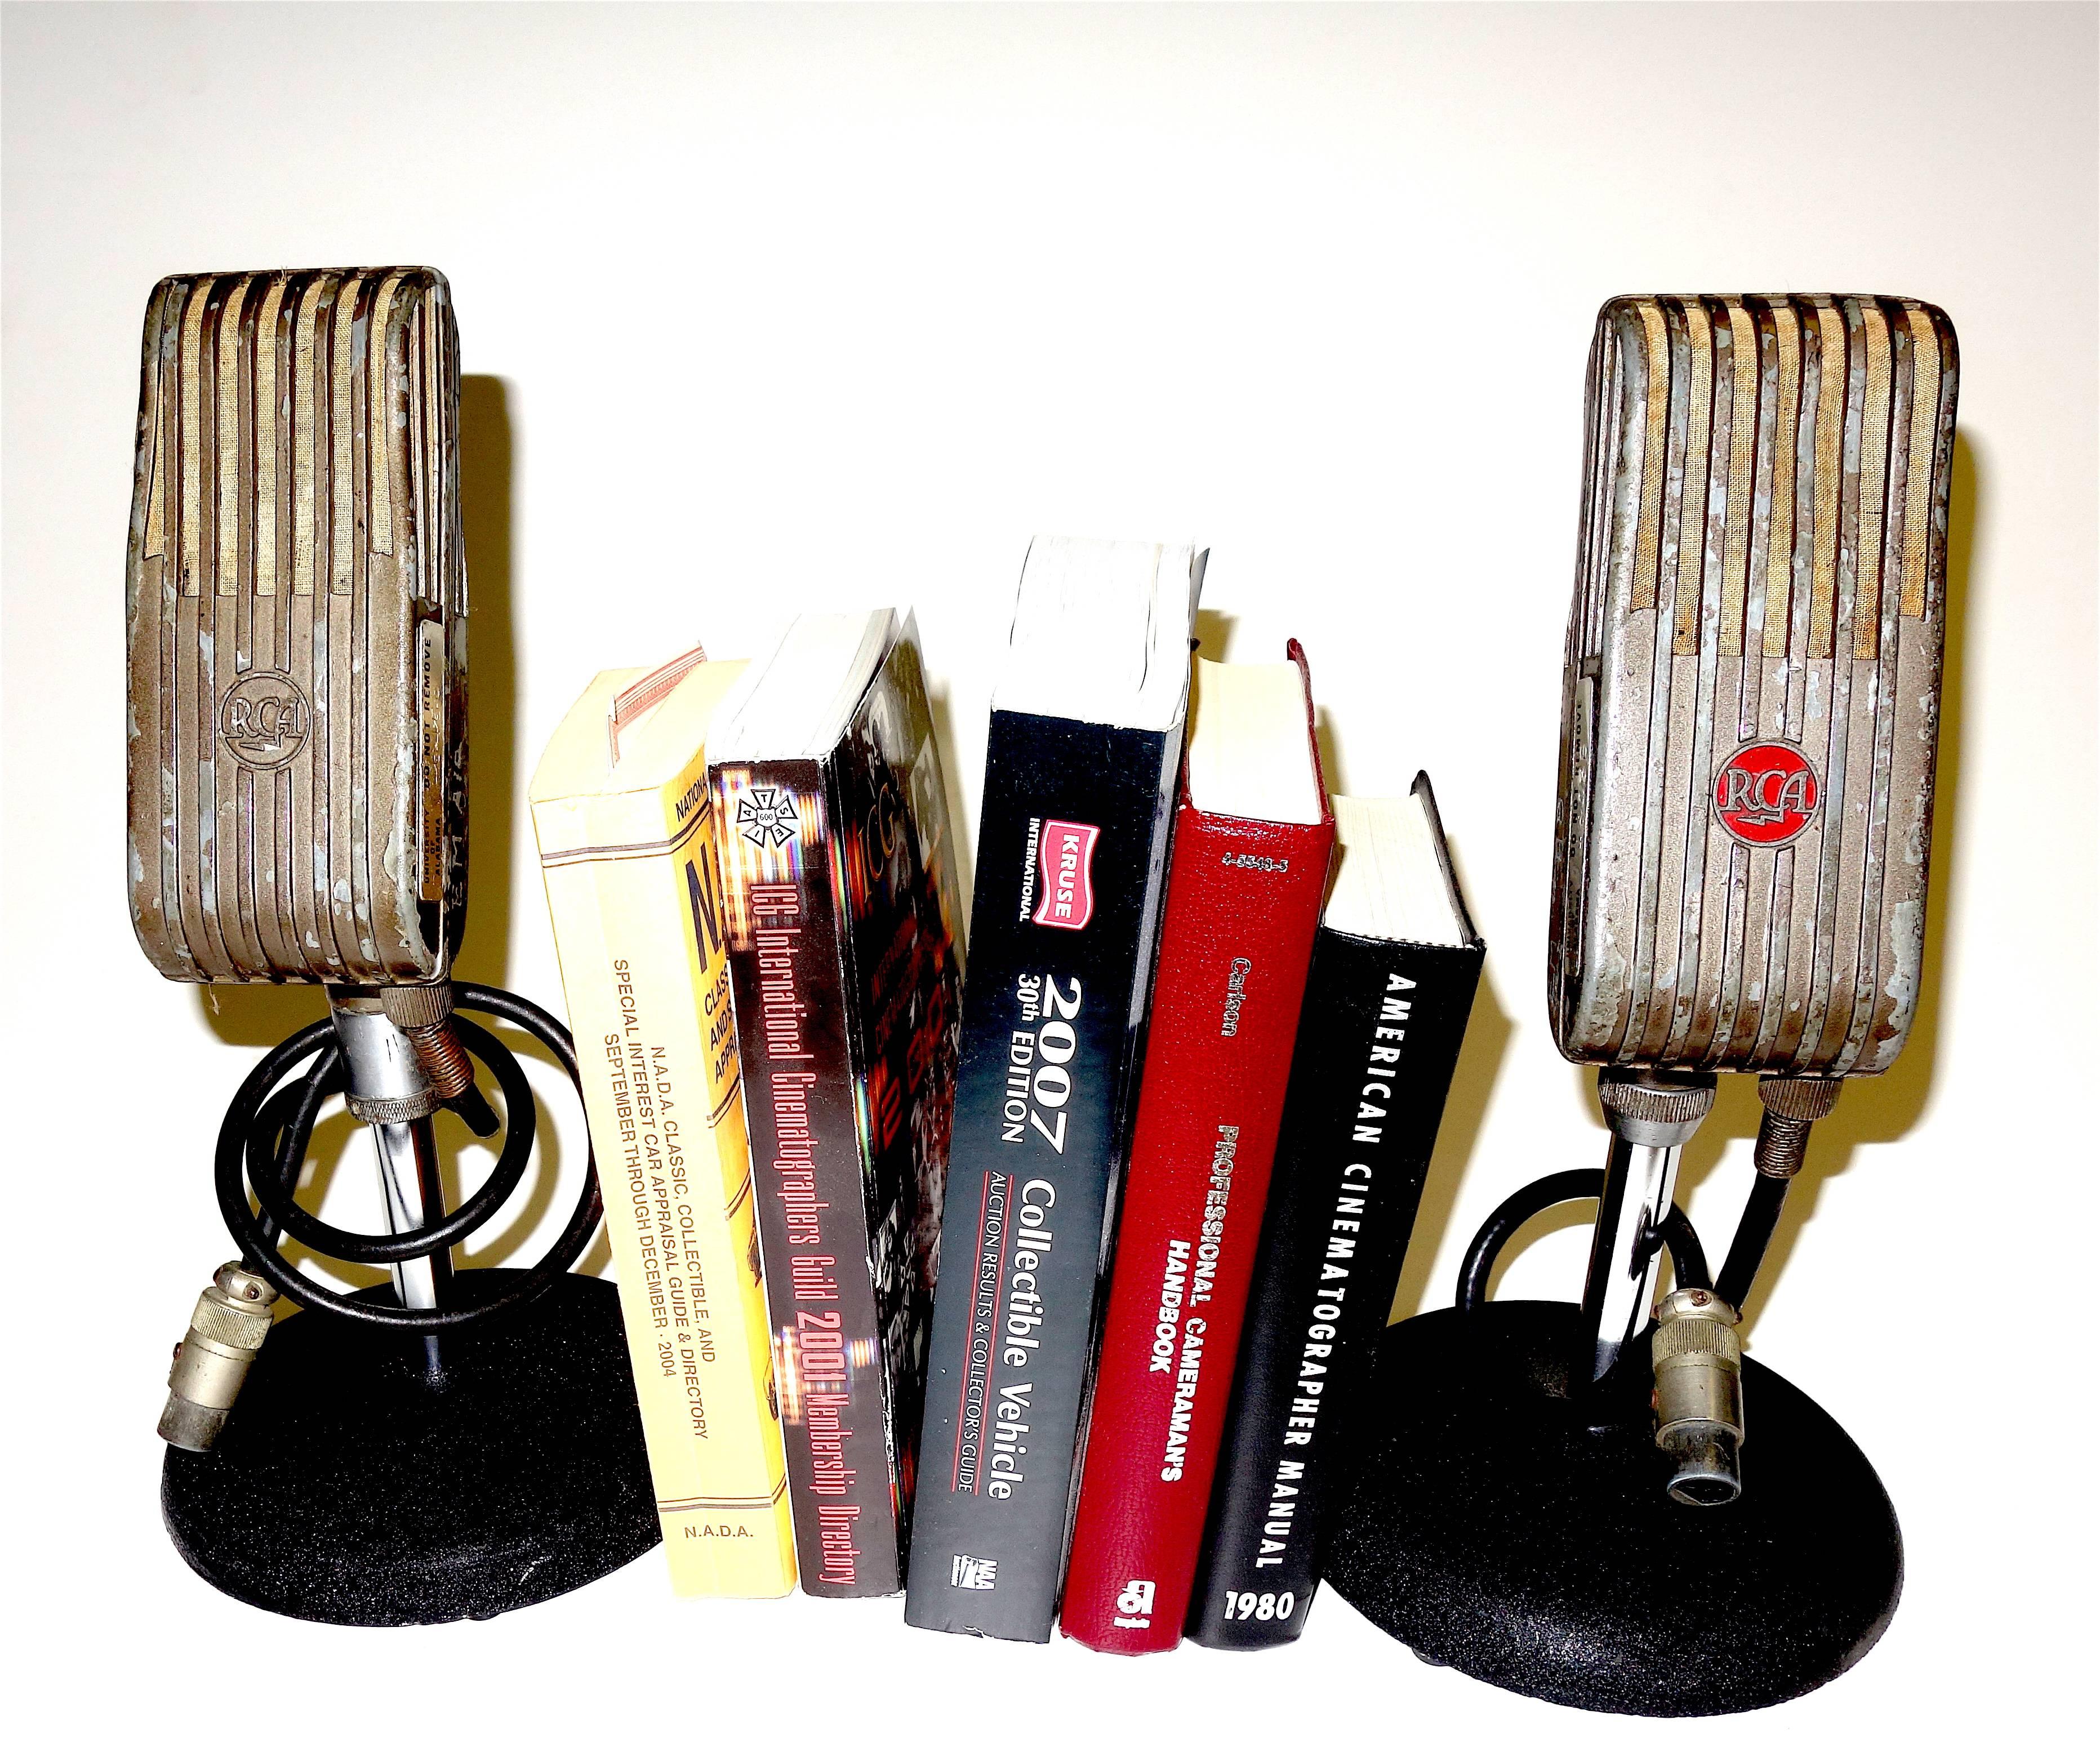 RCA Broadcast Microphones, 1945. As Bookends or Display As Sculpture. ON SALE For Sale 3